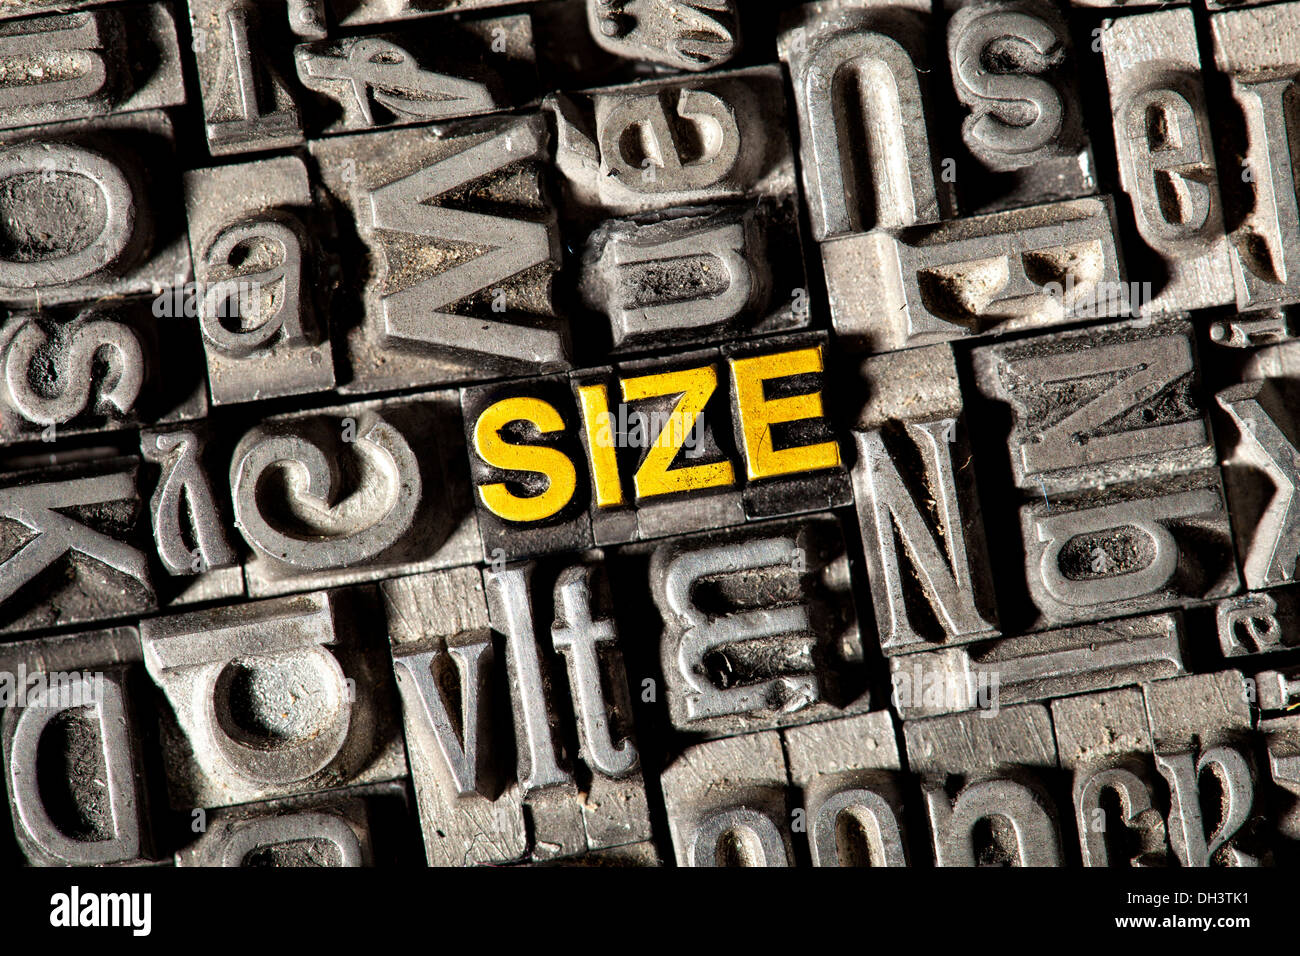 Old lead letters forming the word 'SIZE' Stock Photo